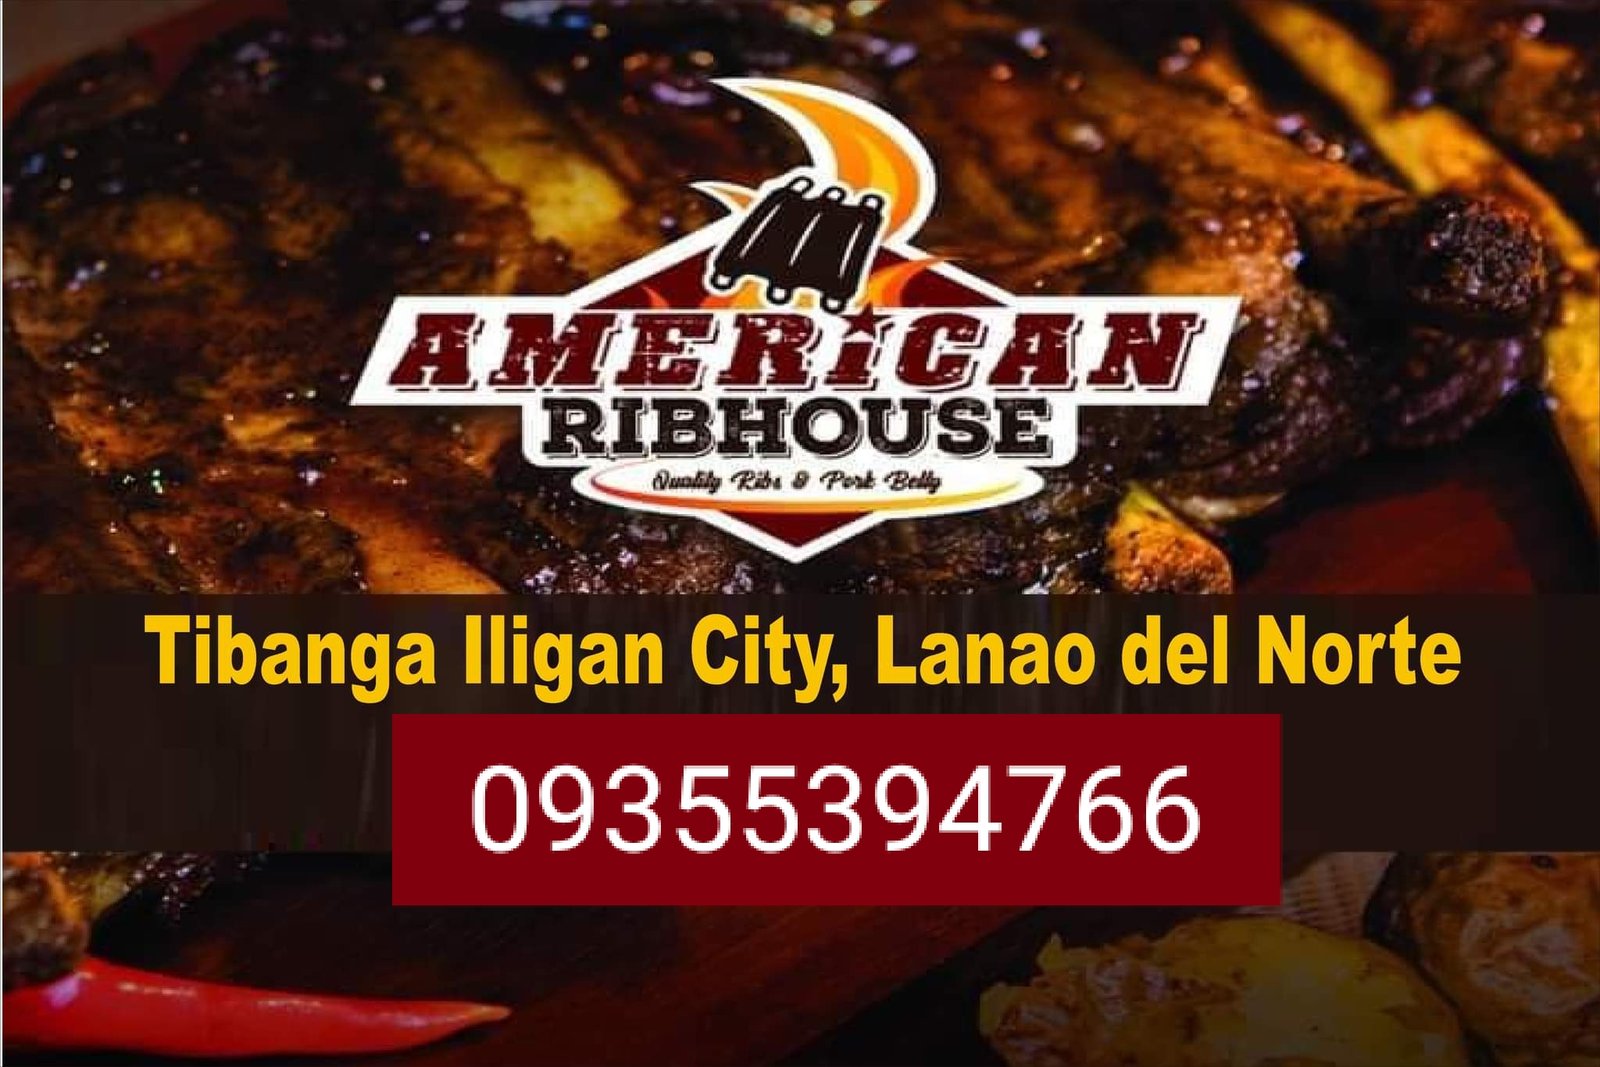 American Ribhouse Iligan City is now open to serve you the best ribs in town